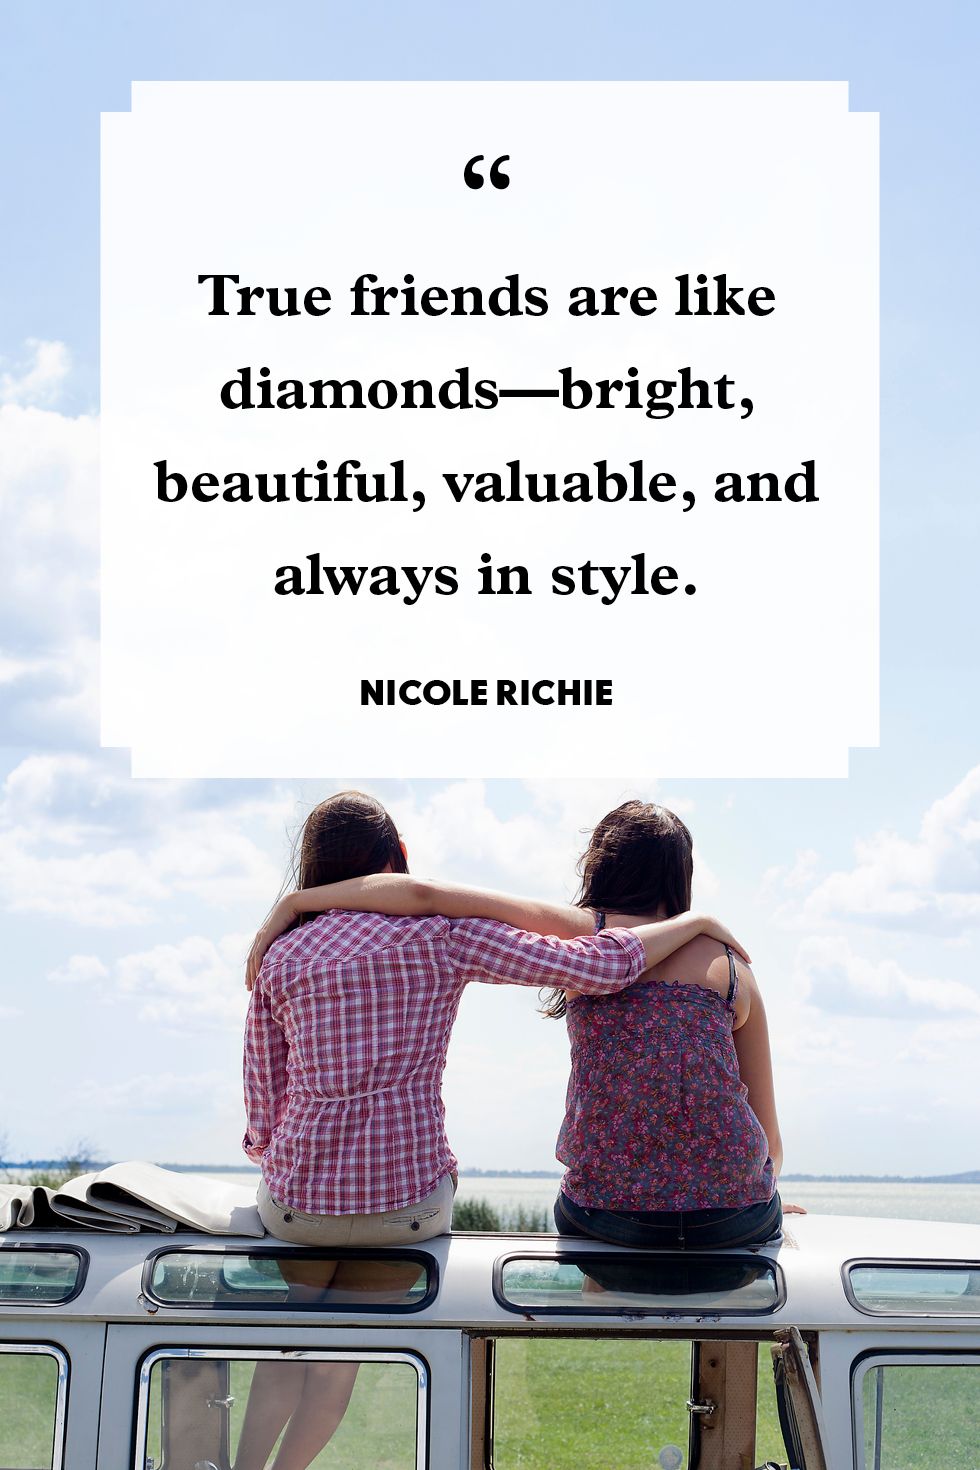 Incredible Collection of Friendship Quotes Images – Top 999+ Inspirational Friendship Quotes in Full 4K